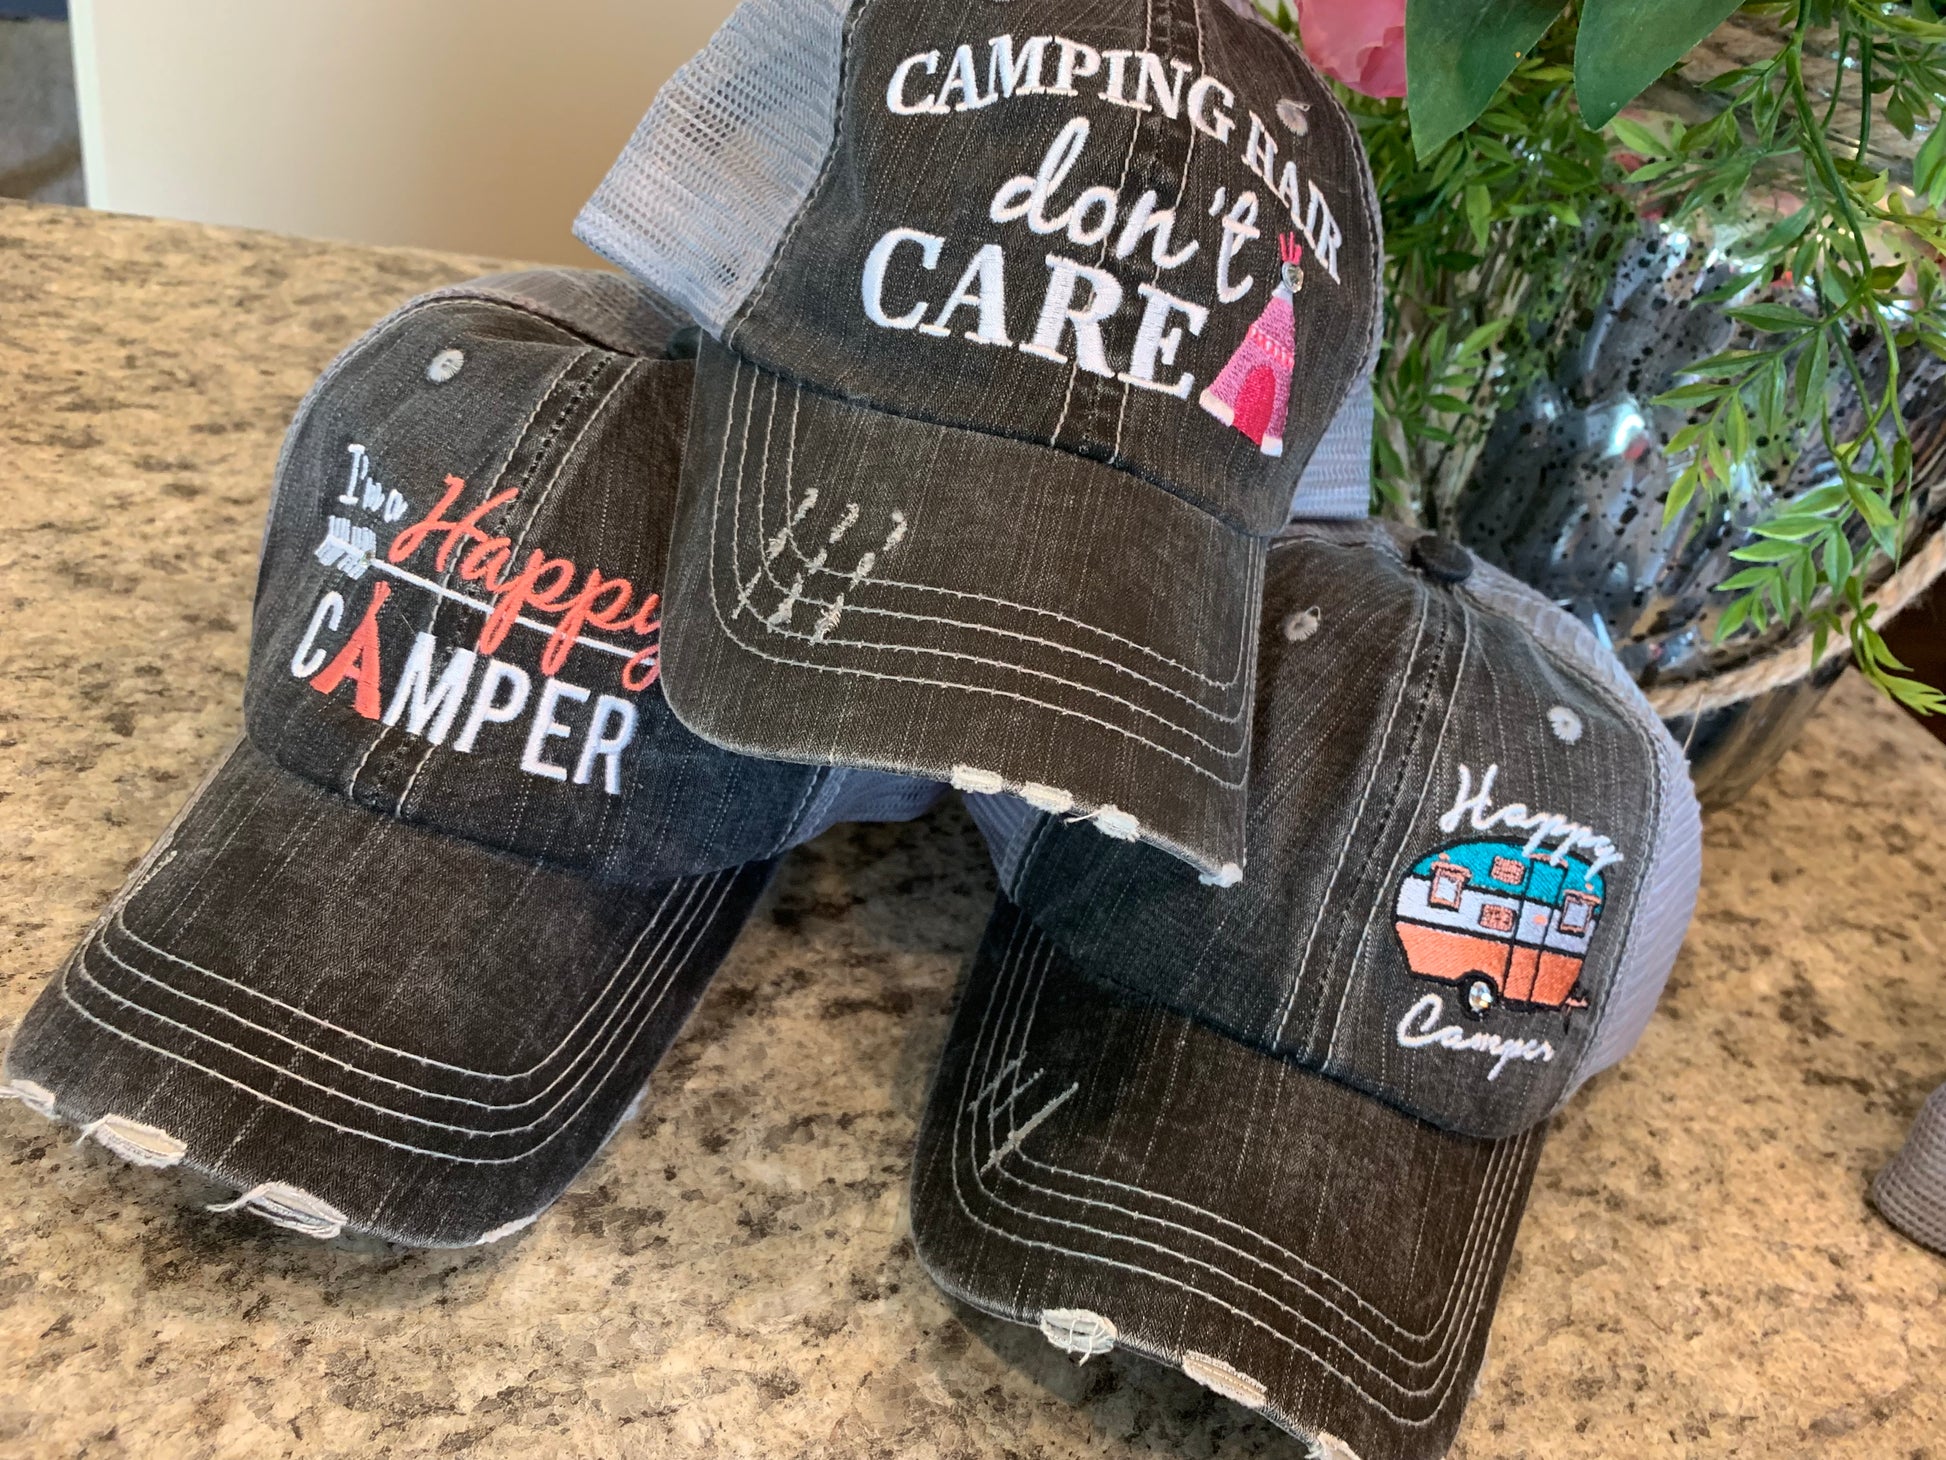 Hats or tanks { I'M A HAPPY CAMPER } { Camping hair don’t care } { Camping life } { Glamping hair don’t care } Embroidered distressed gray unisex trucker caps. Adjustable Velcro and hole for pony. RV there yet? - Stacy's Pink Martini Boutique